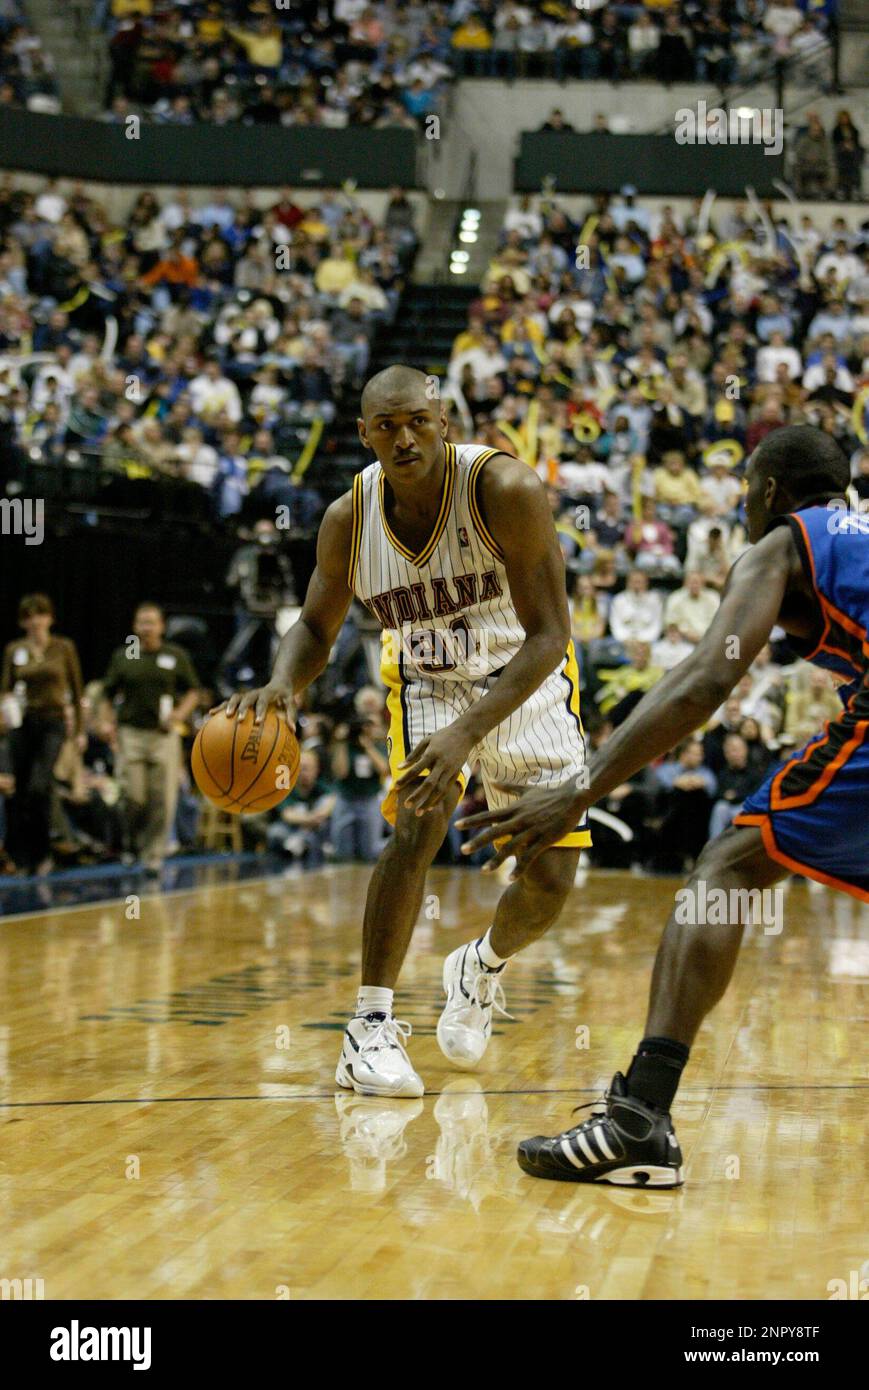 Indiana Pacers forward Ron Artest (91) makes a move with the basketball against the New York Knicks during an NBA game, Saturday Nov. 13, 2004 in Indianapolis. (Kevin Reece via AP) Stock Photo